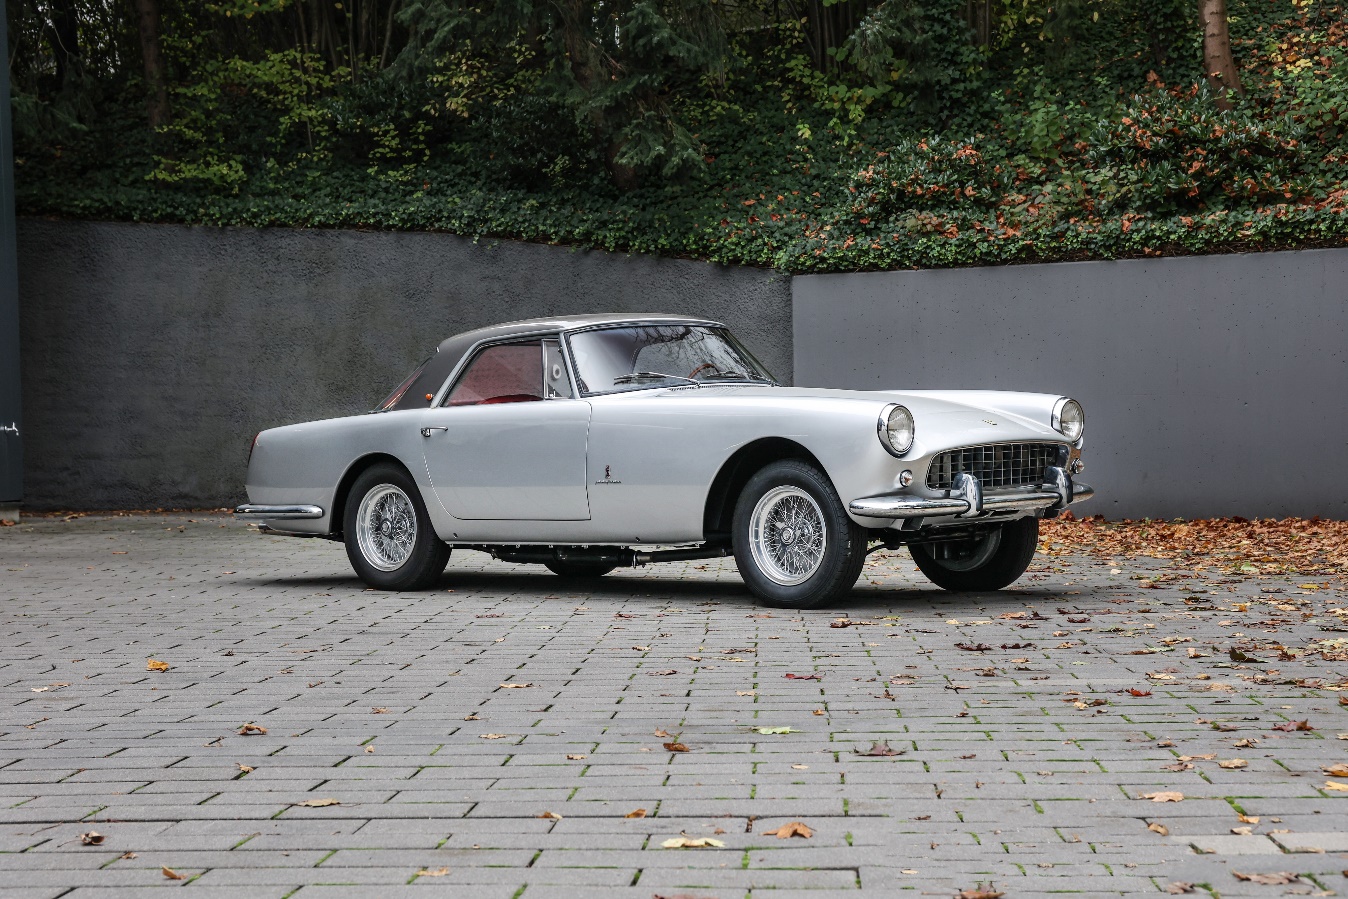 221115 RM Sotheby's Munich Auction - Courtesy of RM Sotheby's - image004